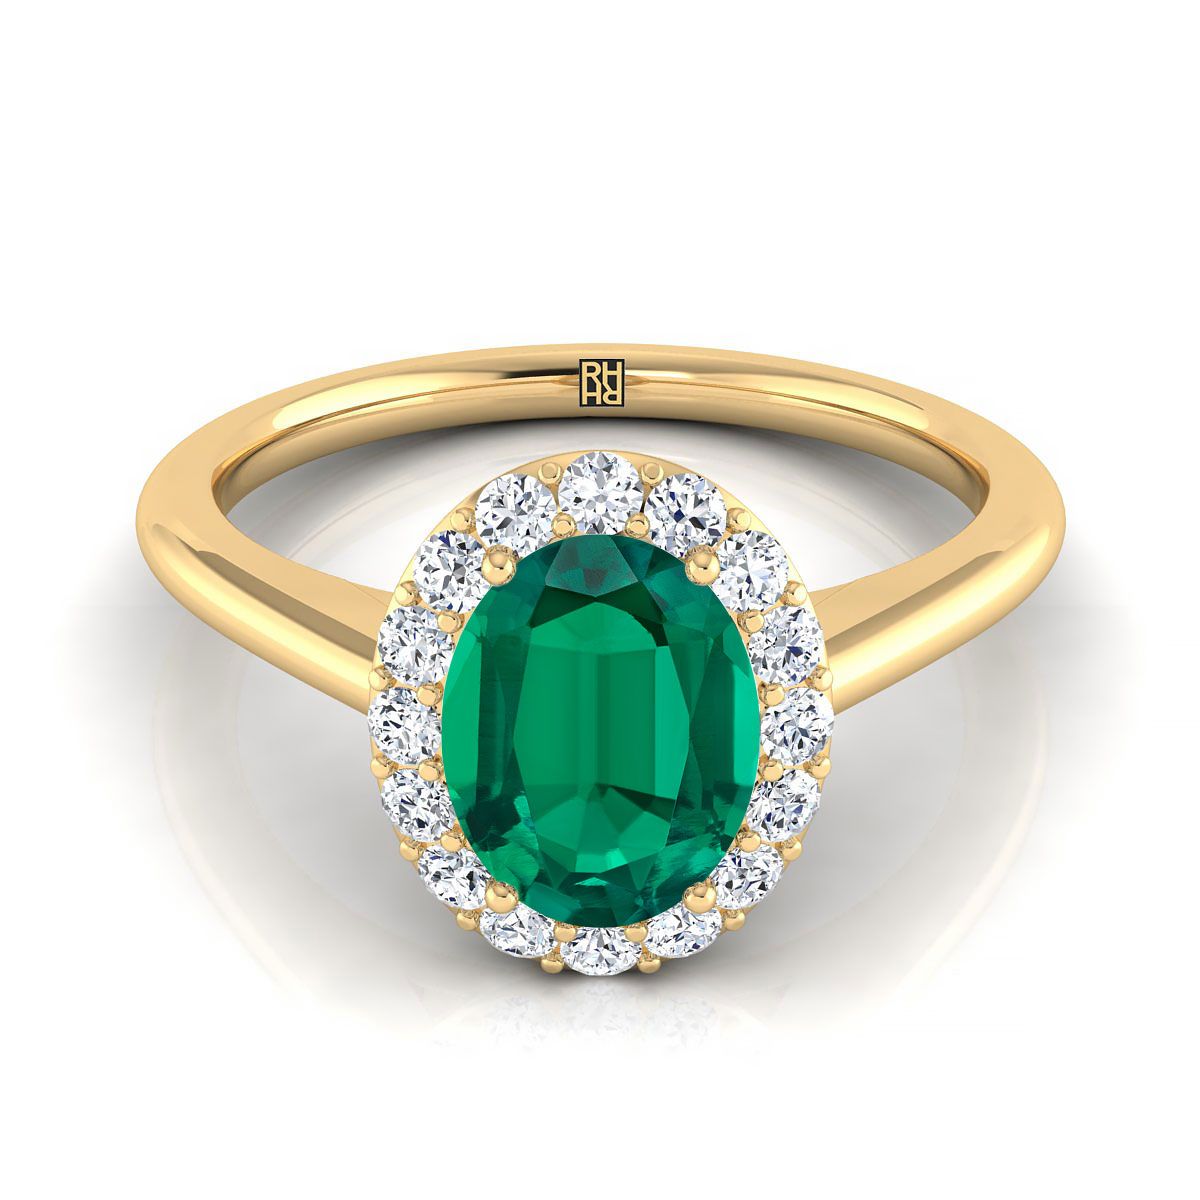 14K Yellow Gold Oval Emerald Shared Prong Diamond Halo Engagement Ring -1/5ctw